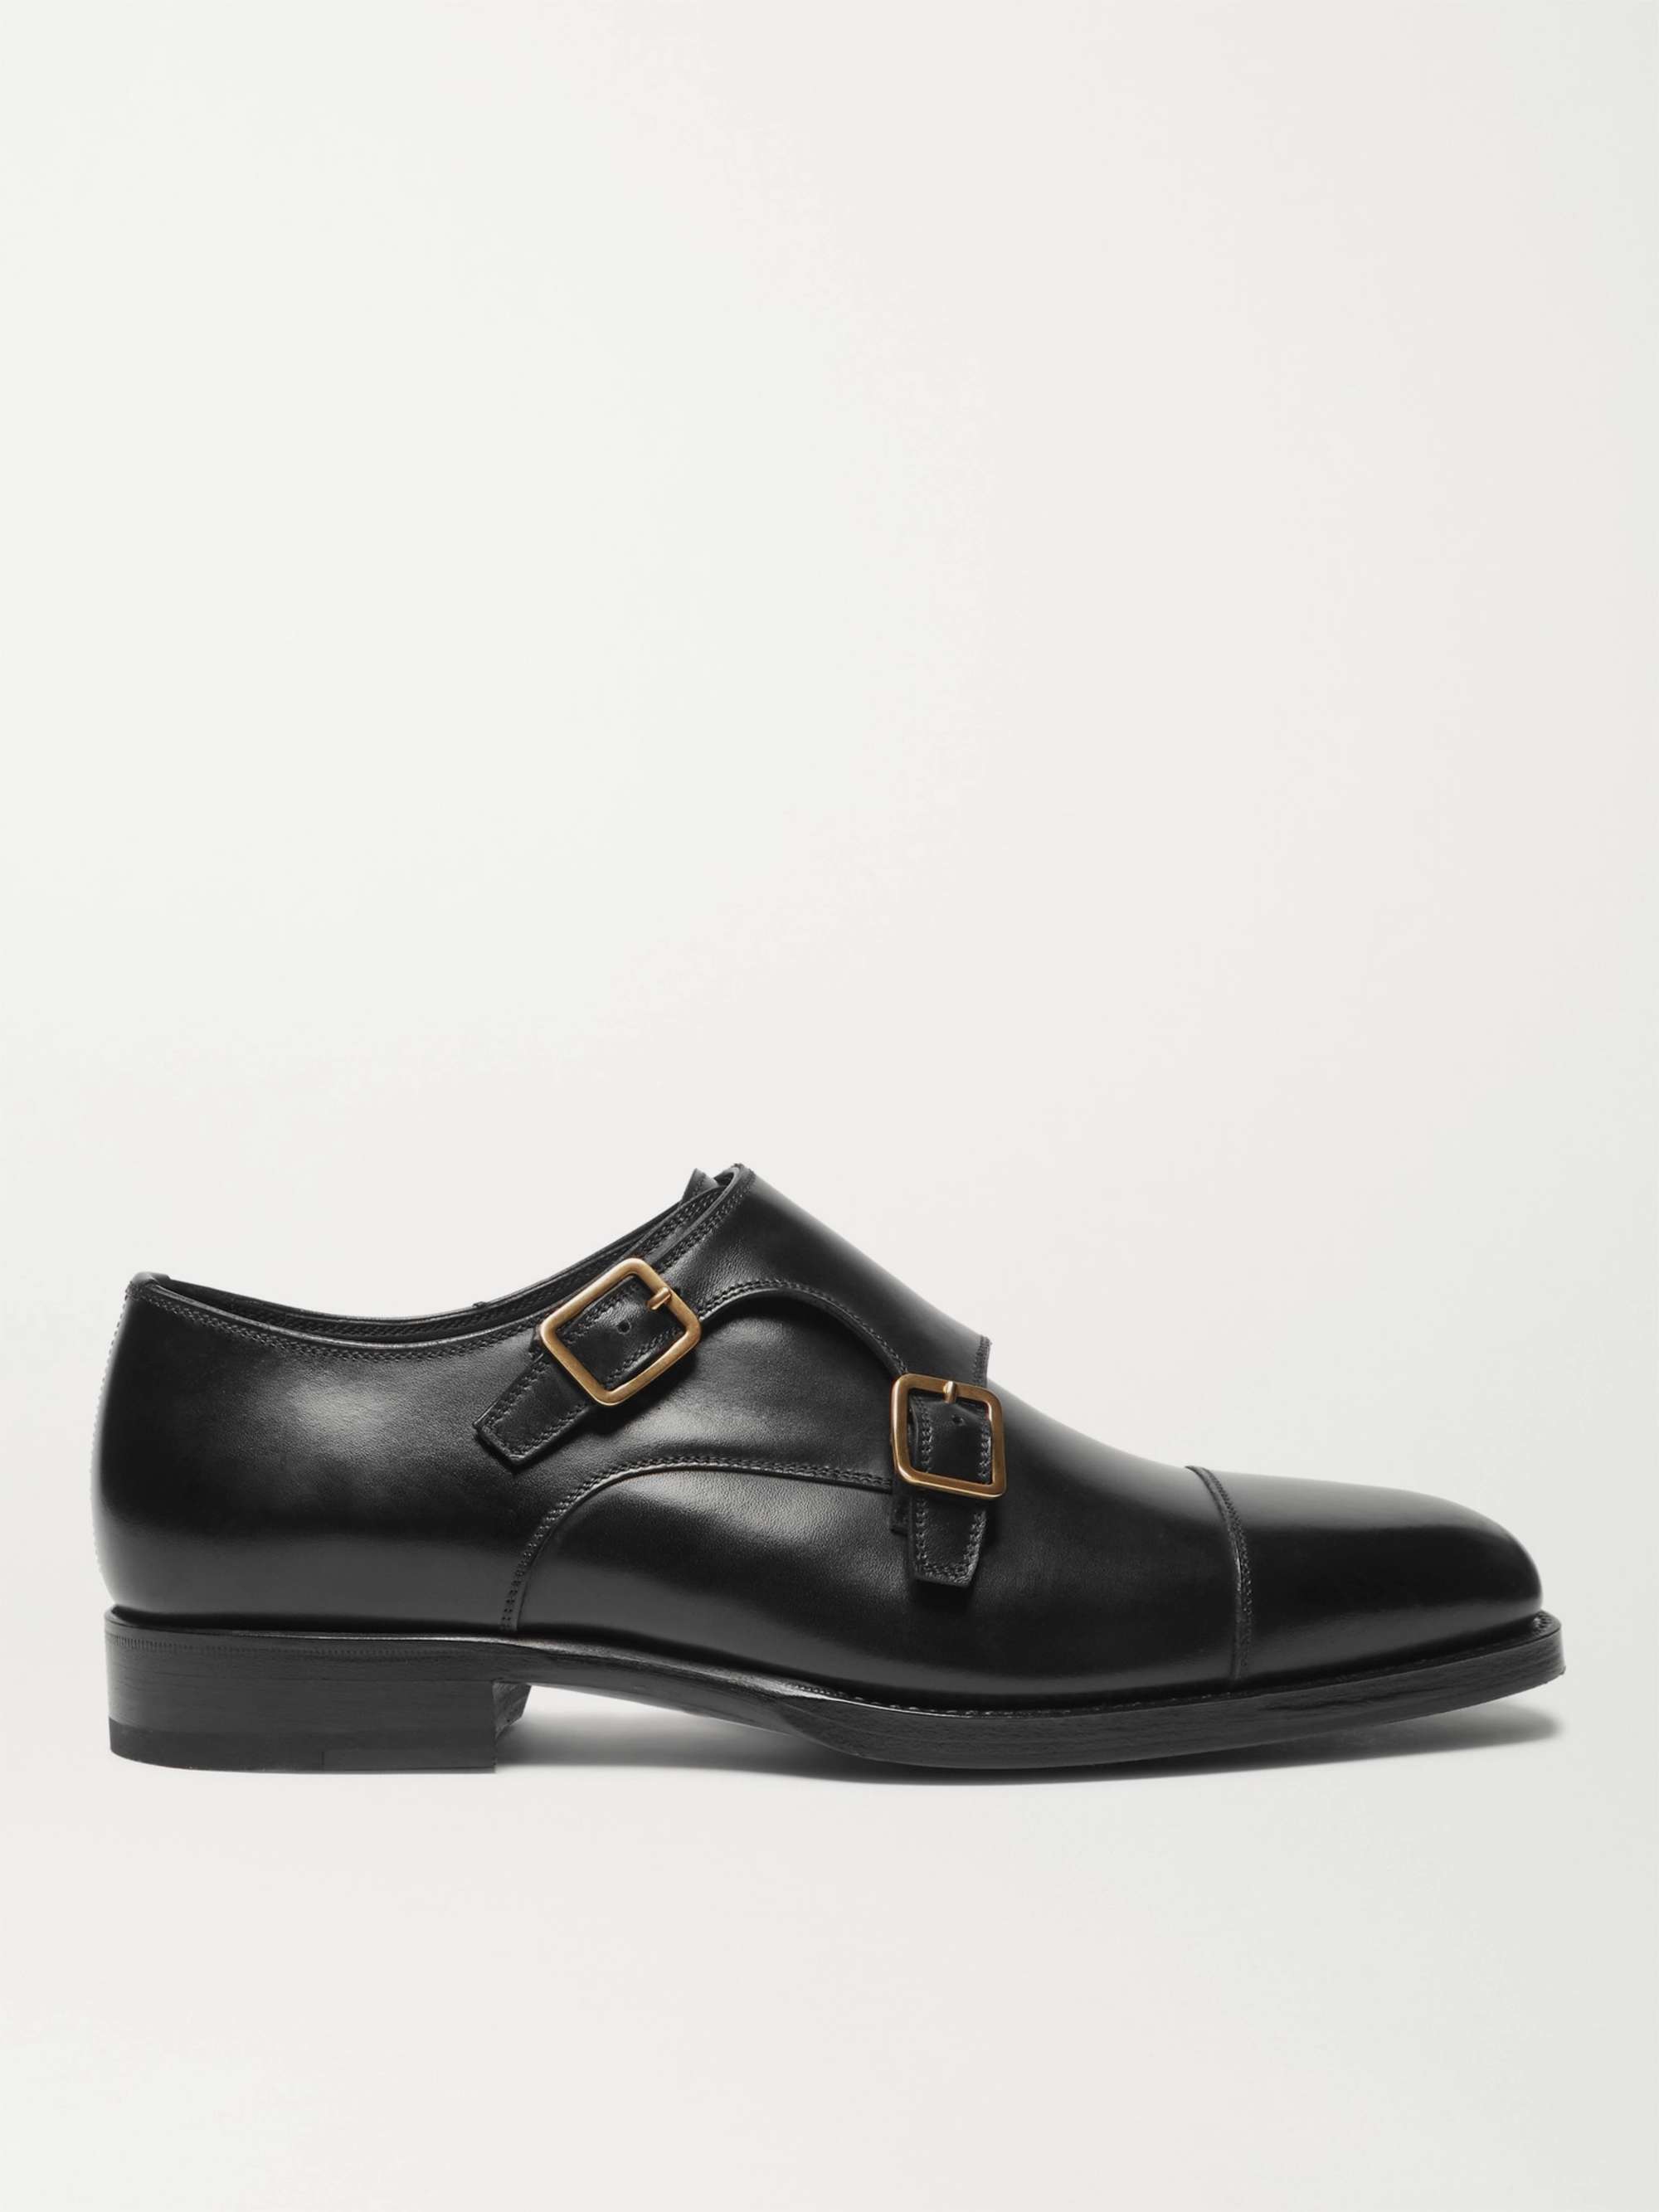 TOM FORD Wessex Cap-Toe Leather Monk-Strap Shoes